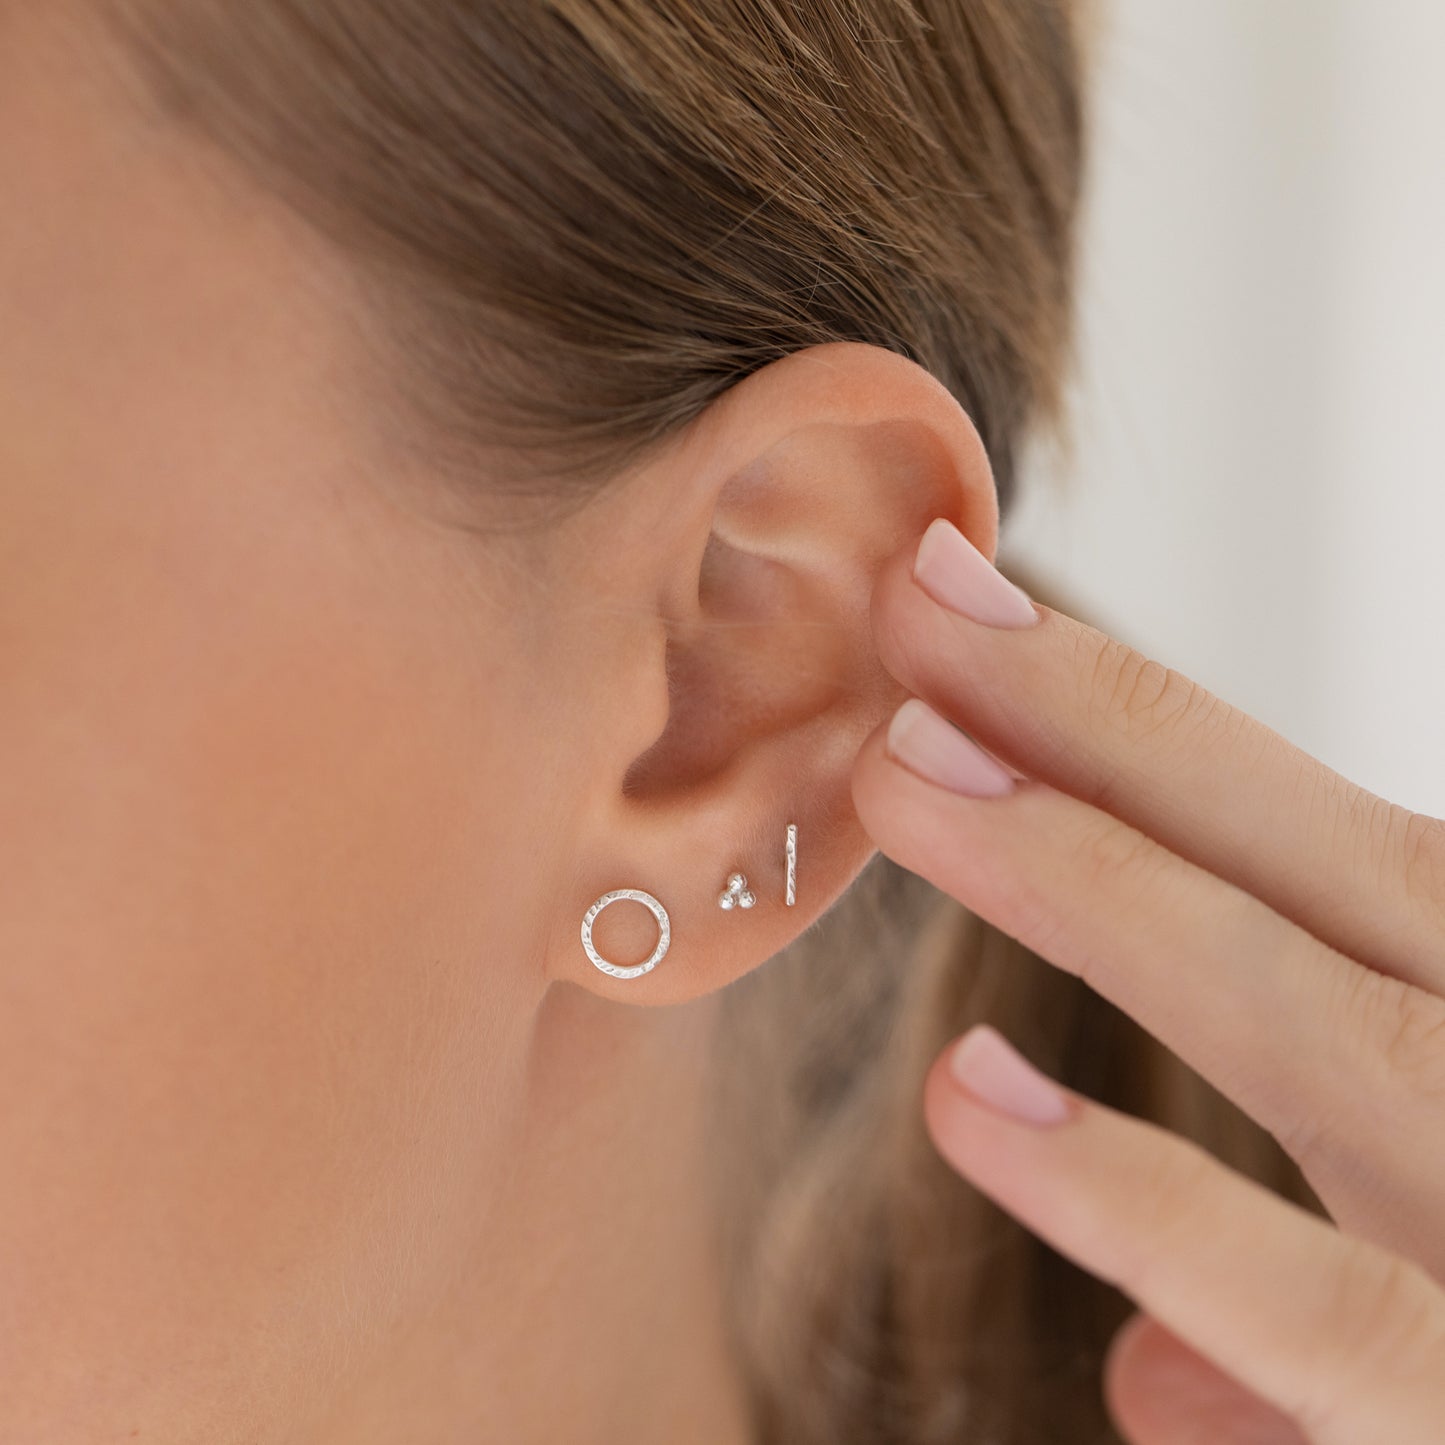 Load image into Gallery viewer, Triple Dot Stud Earring in Silver
